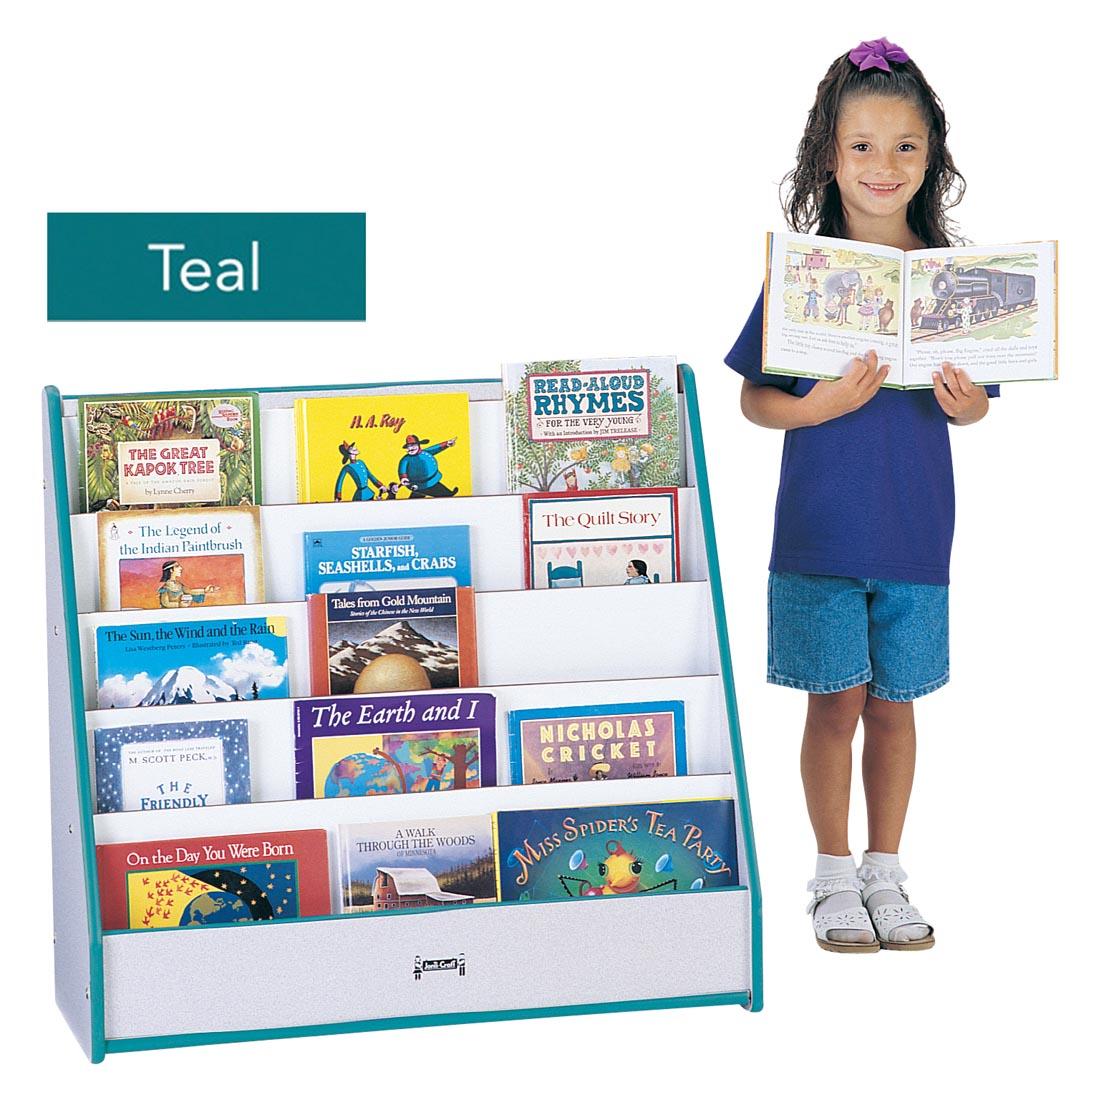 Child standing beside the Colored Edged Pick-a-Book Flushback Book Stand with a text overlay labeled Teal